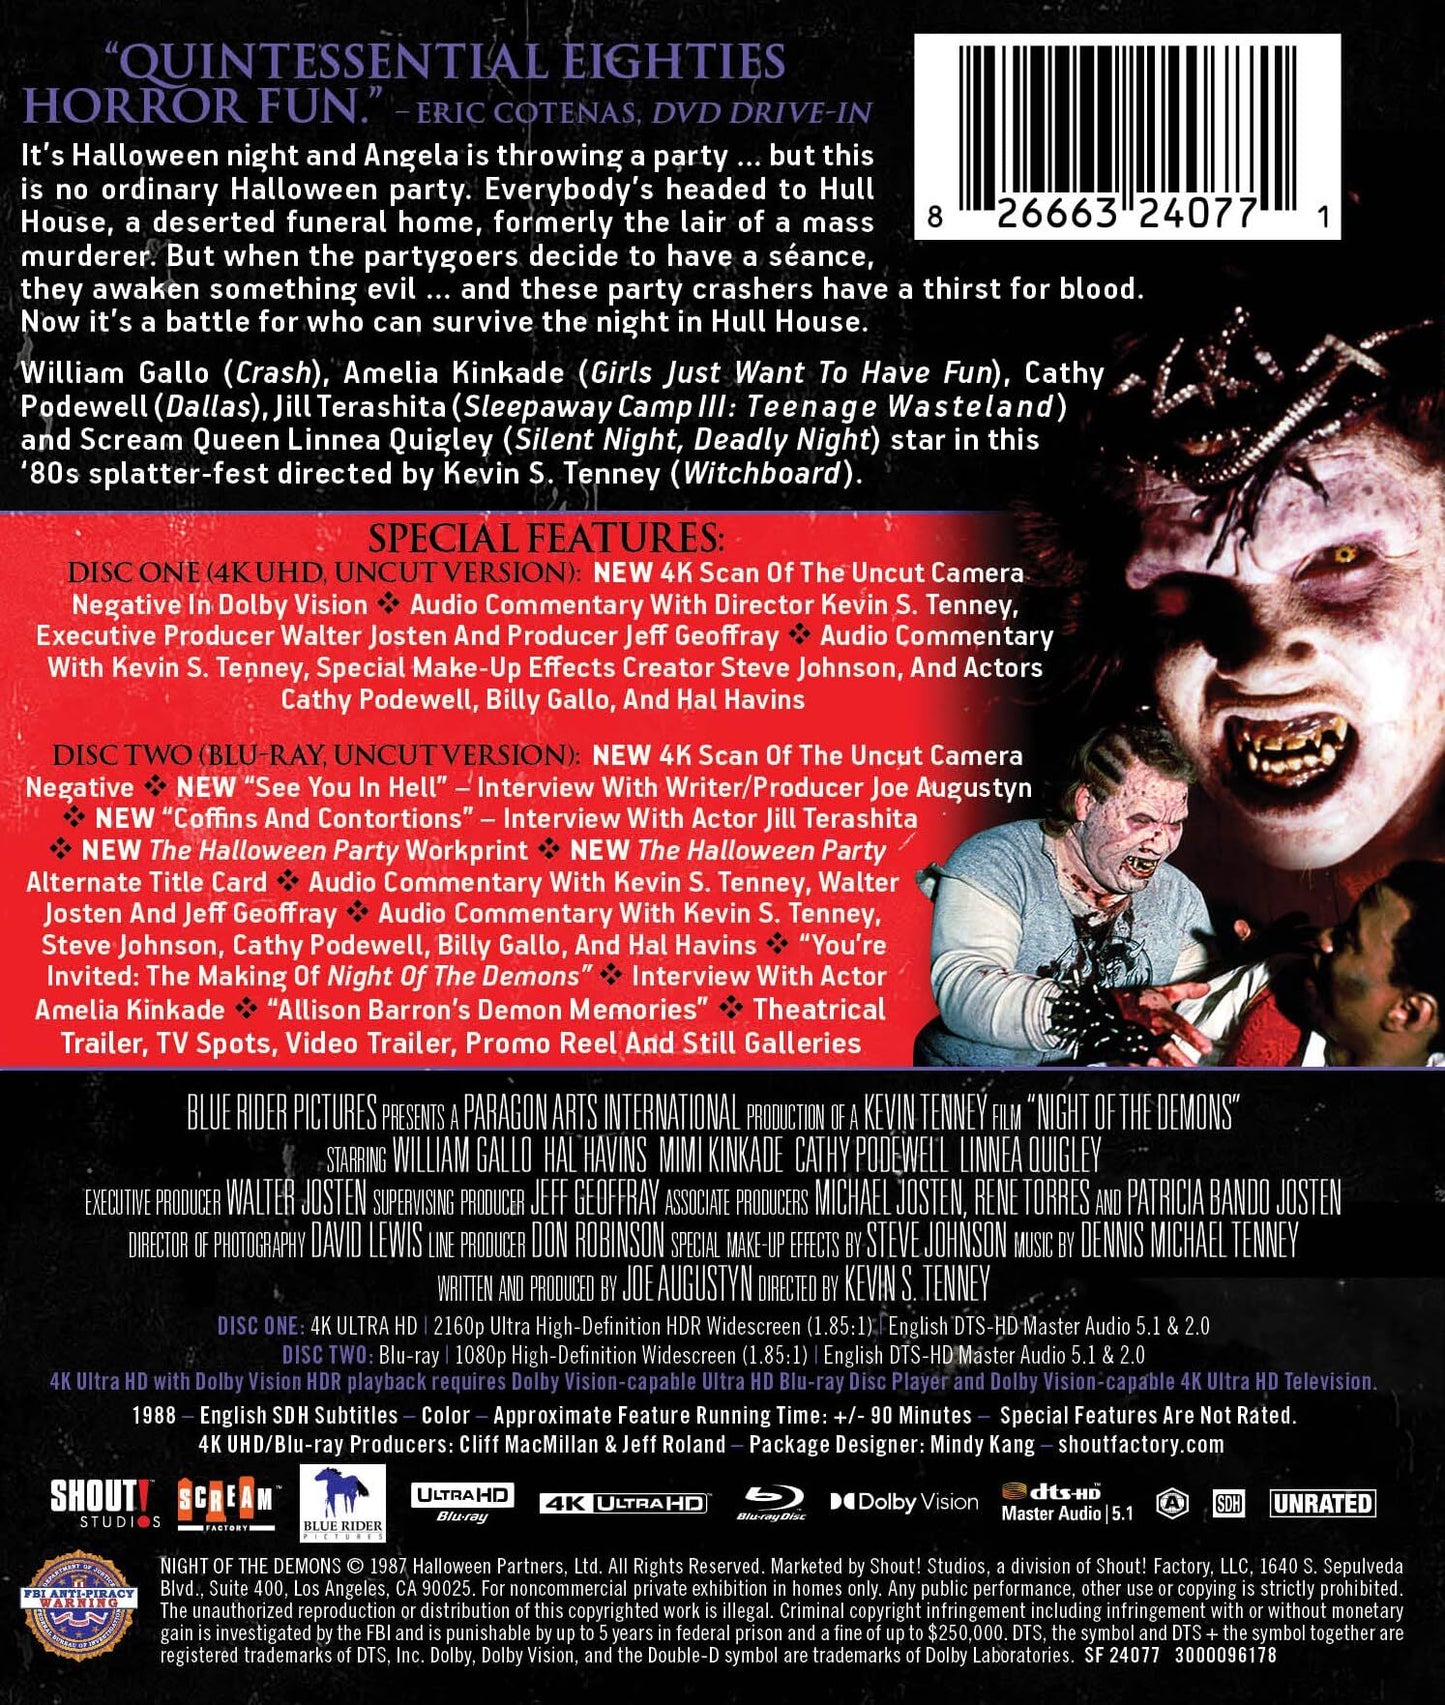 Night of the Demons 4K: Collector's Edition